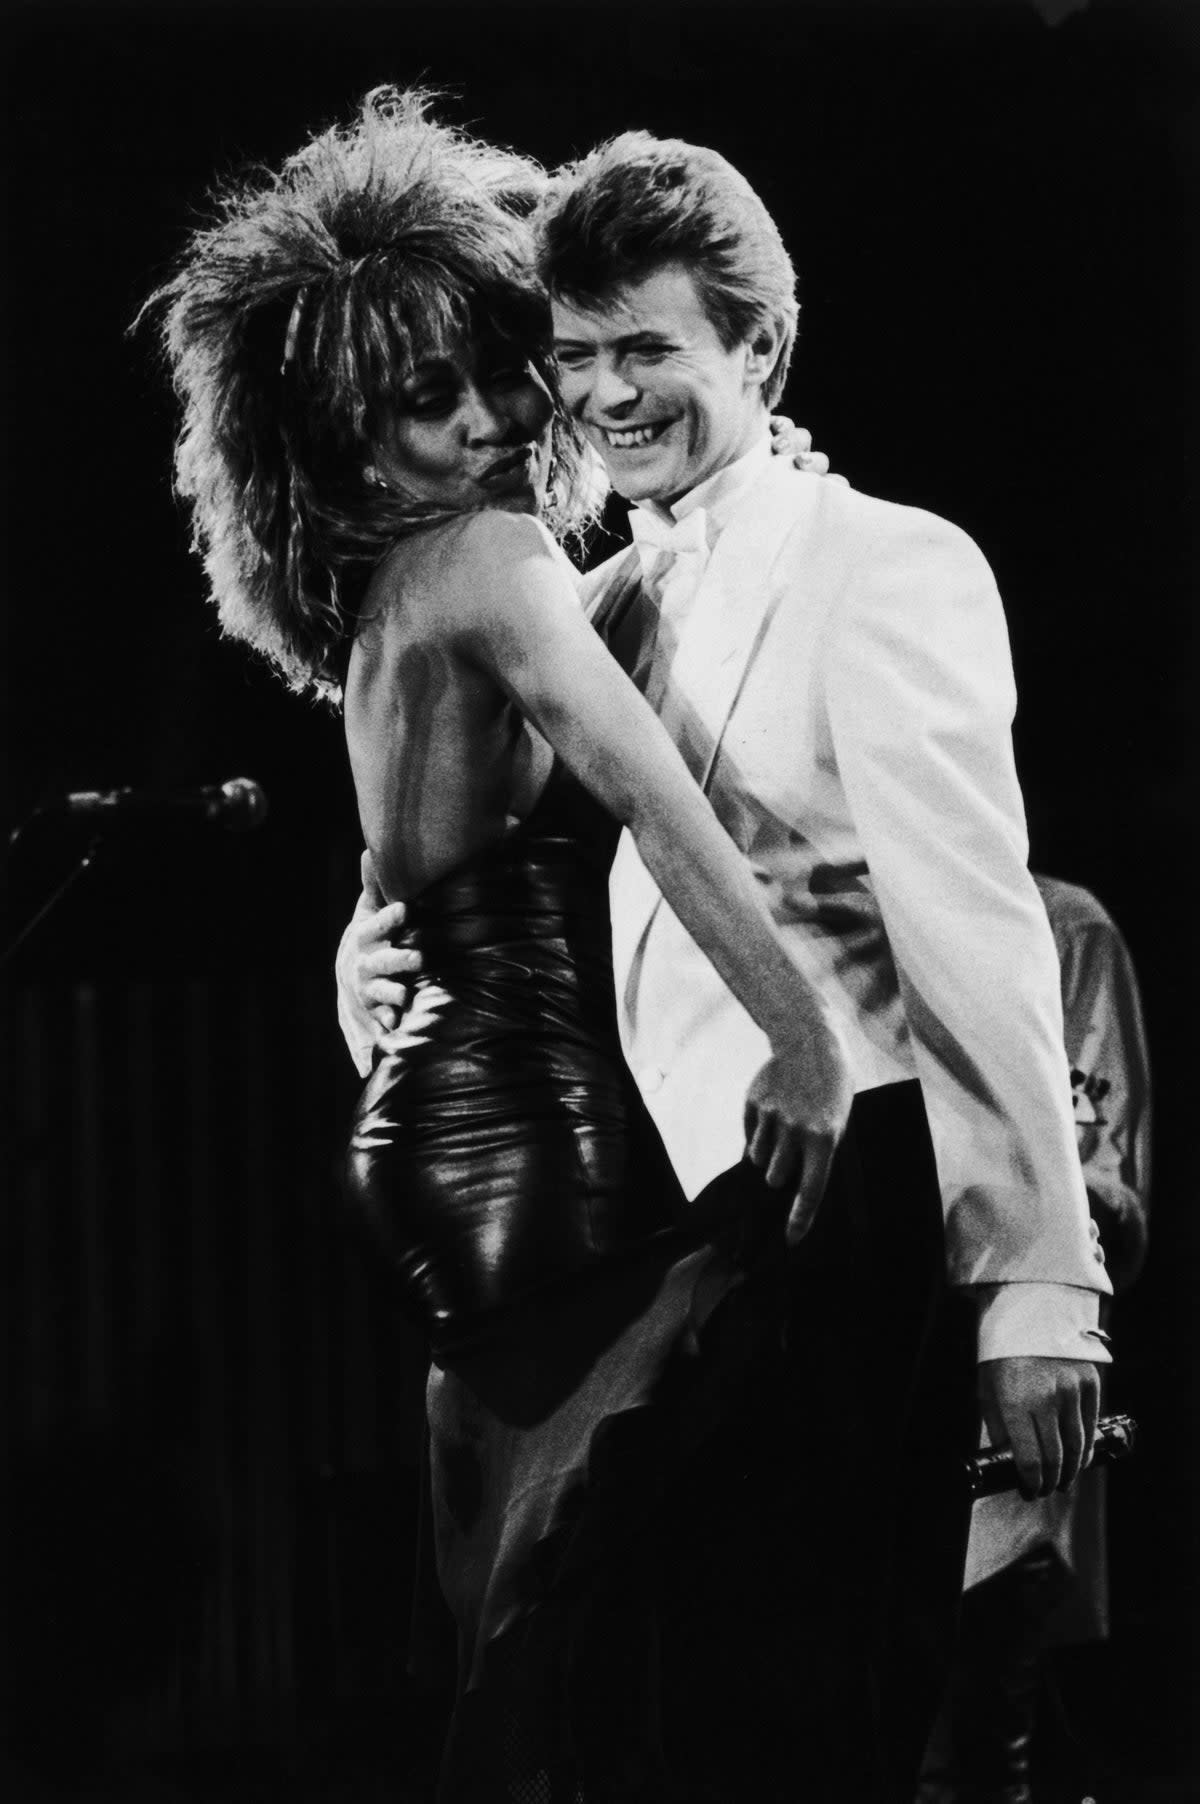 On stage with David Bowie in 1985 (Getty)